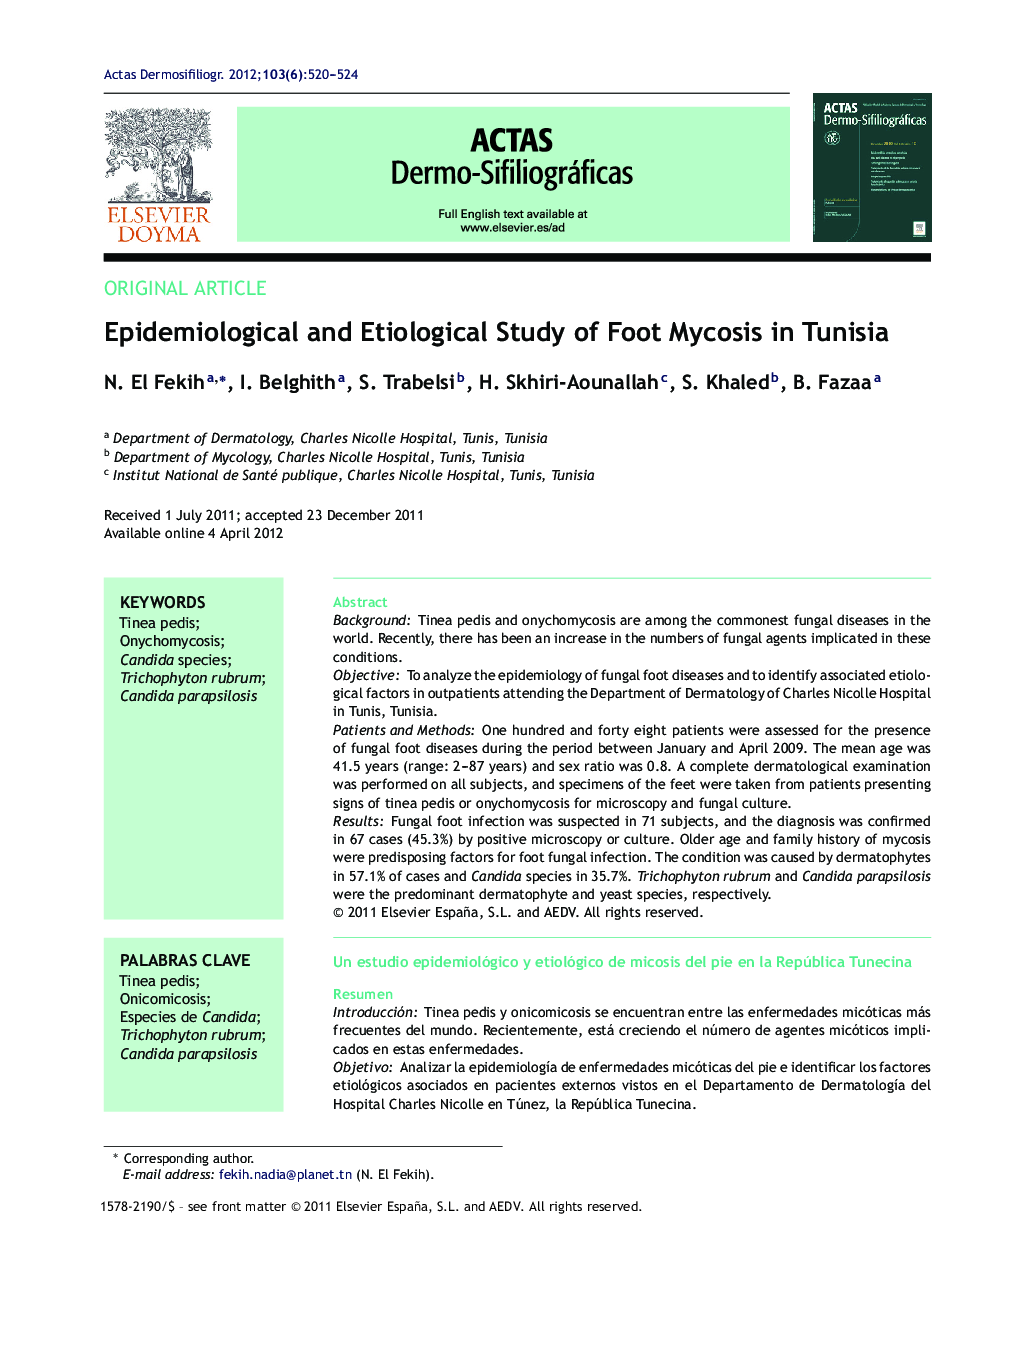 Epidemiological and Etiological Study of Foot Mycosis in Tunisia